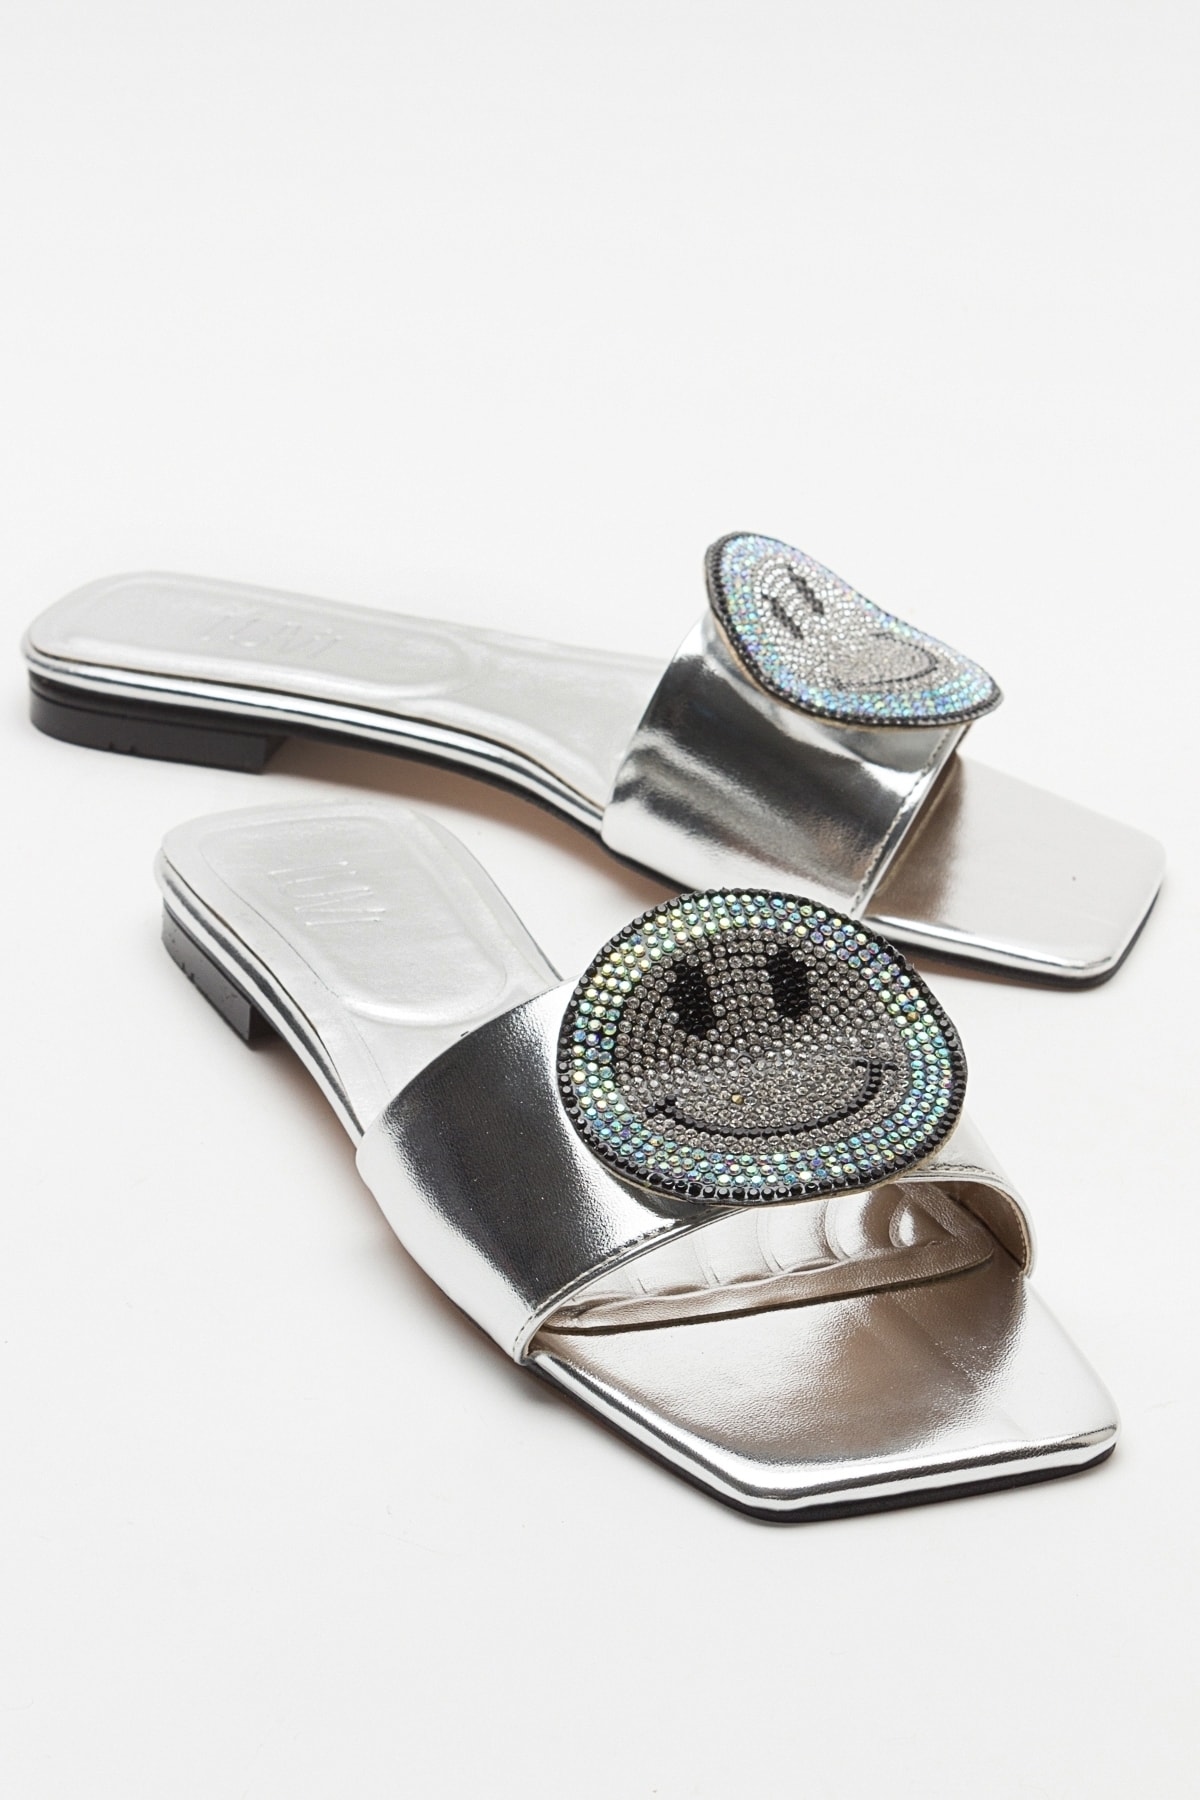 Levně LuviShoes YAVN Women's Slippers with Silver Stones